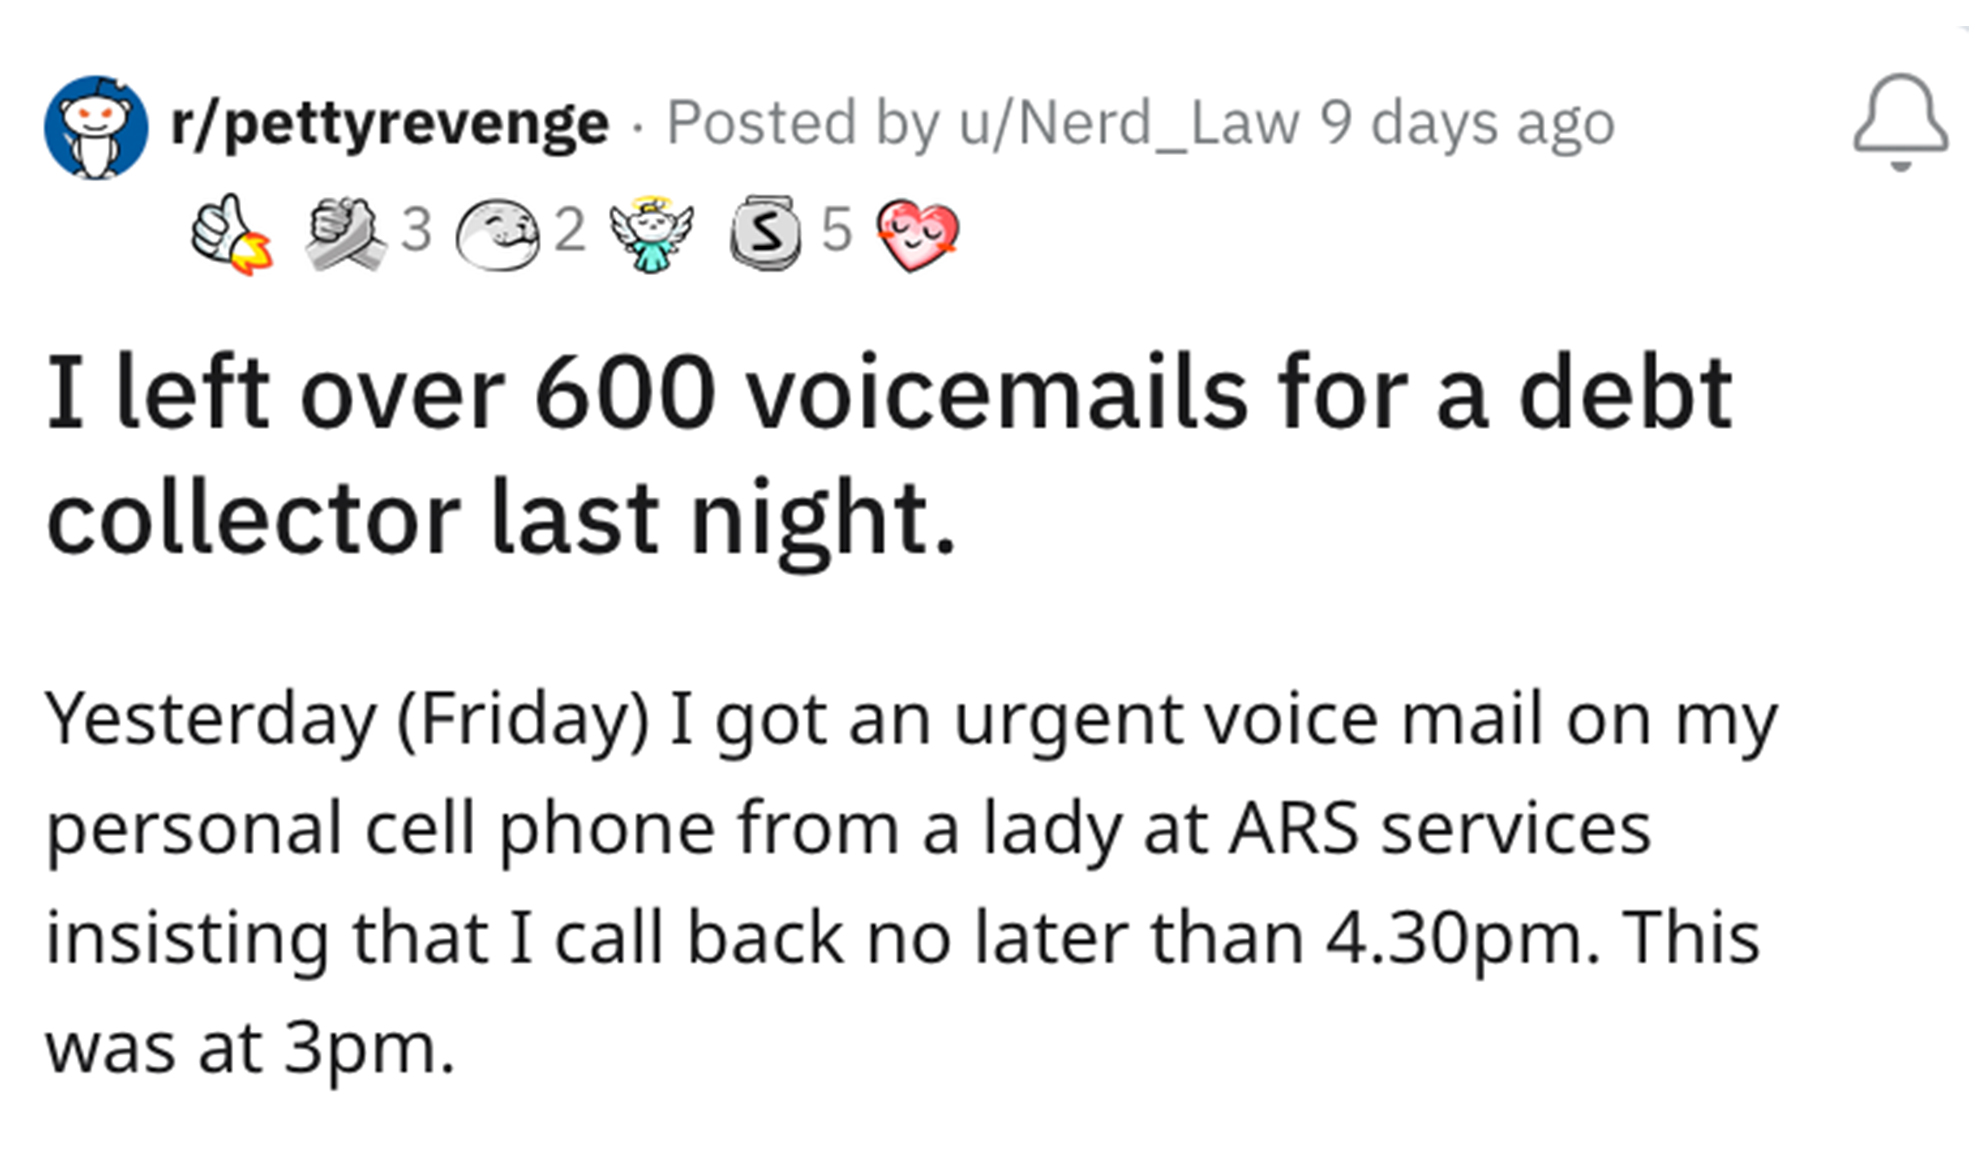 Debt Collector Revenge Story - angle - rpettyrevenge Posted by uNerd_Law 9 days ago 3 2 350 I left over 600 voicemails for a debt collector last night. Yesterday Friday I got an urgent voice mail on my personal cell phone from a lady at Ars services insis